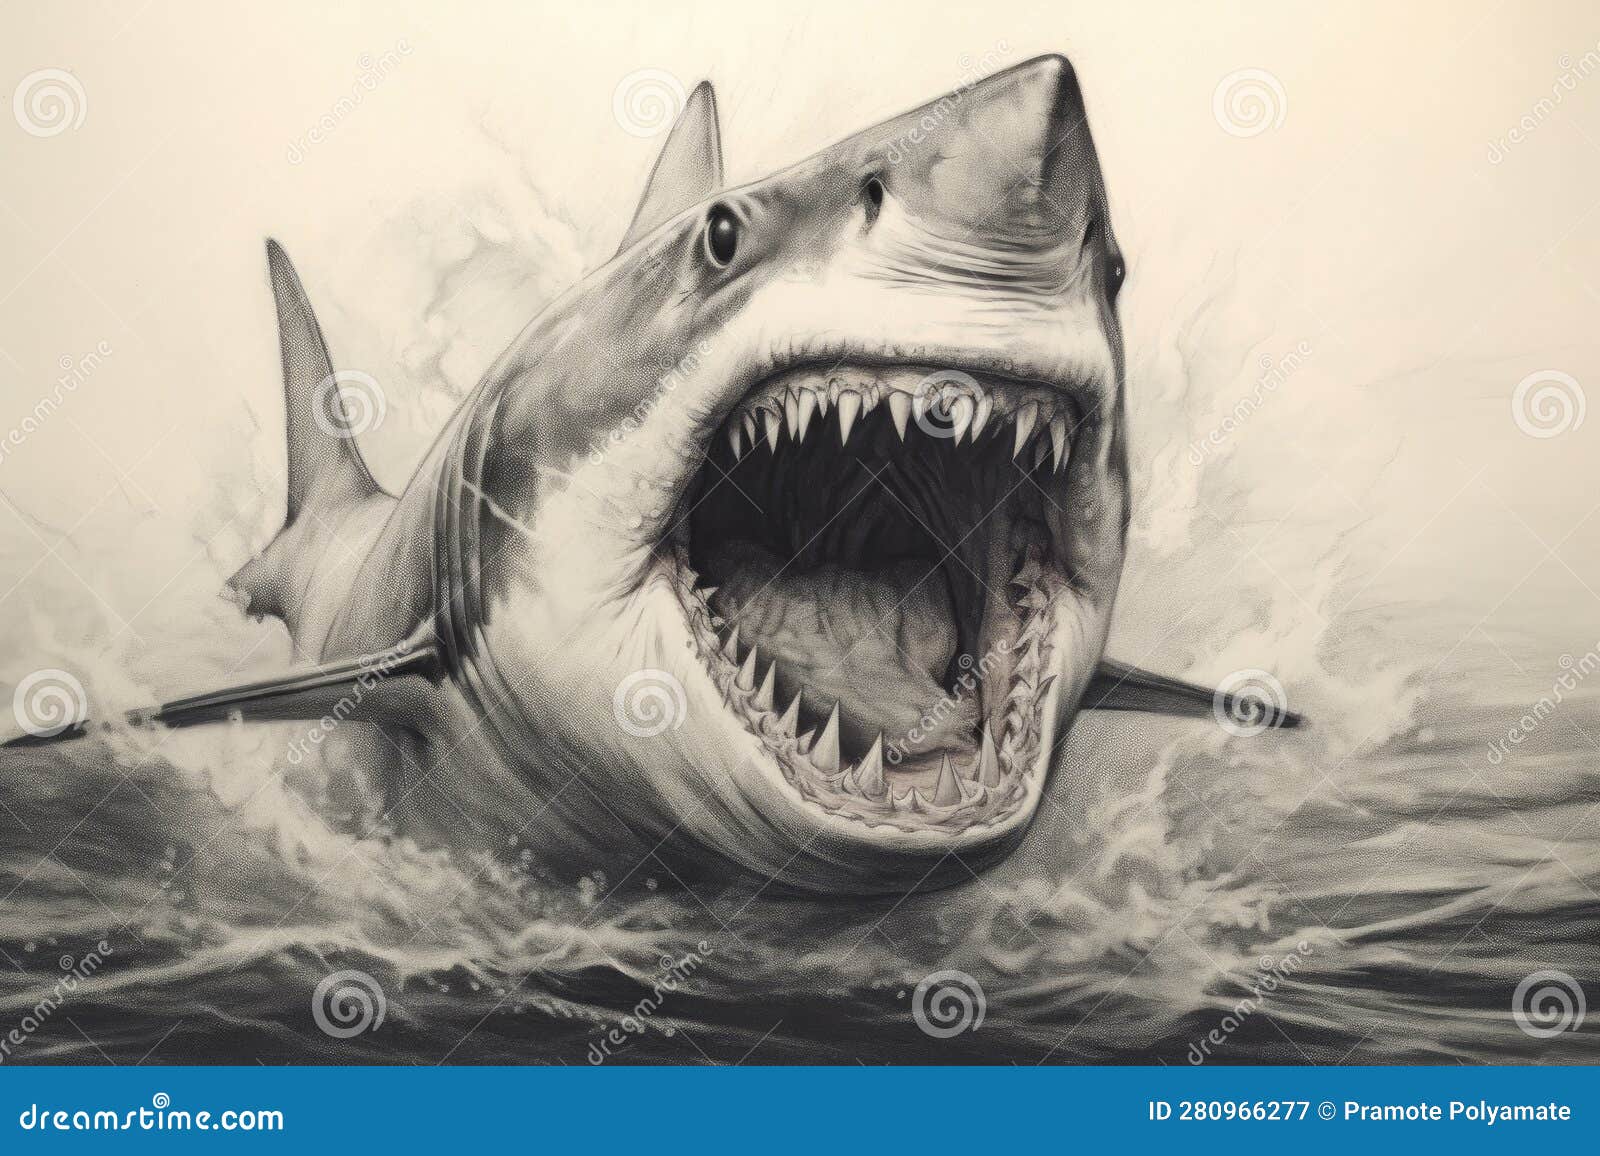 Shark Drawing On Paper Background. Stock Photo, Picture and Royalty Free  Image. Image 204680558.